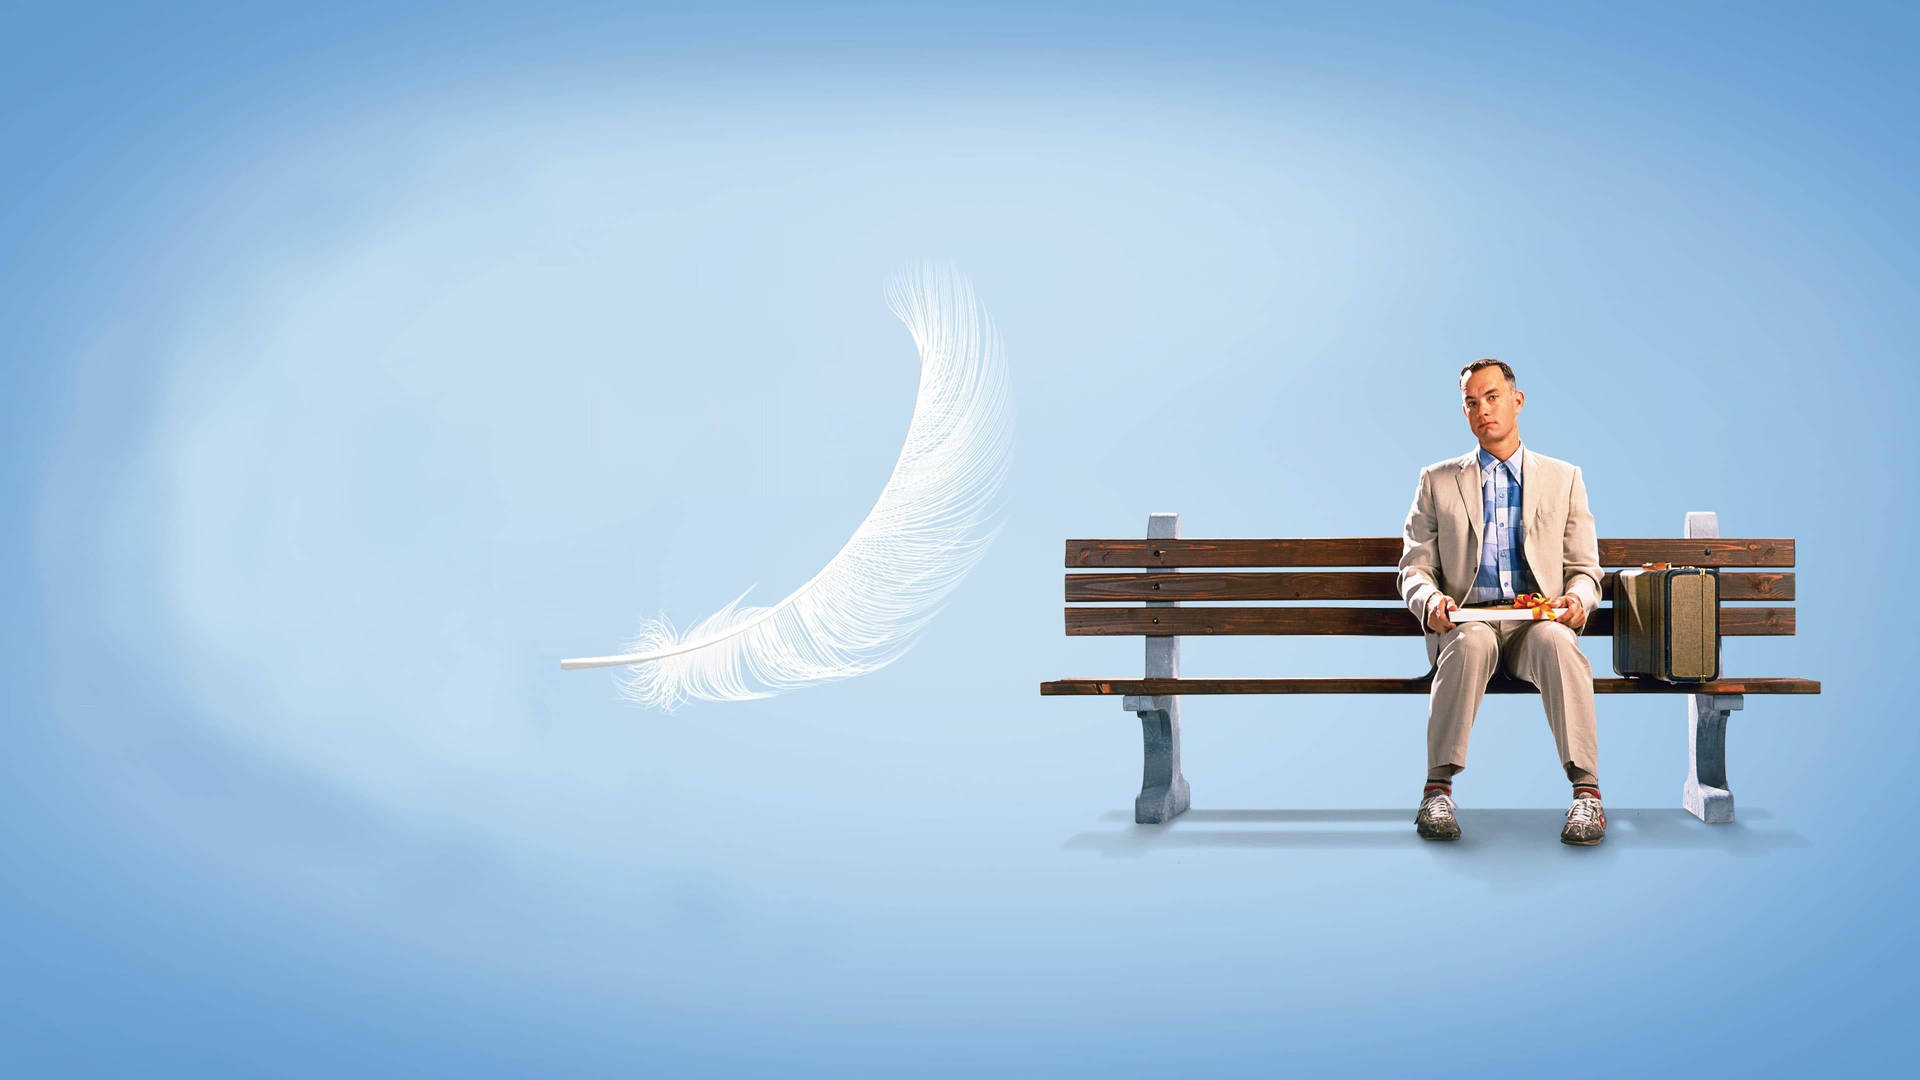 Forrest Gump Feather Poster Wallpaper